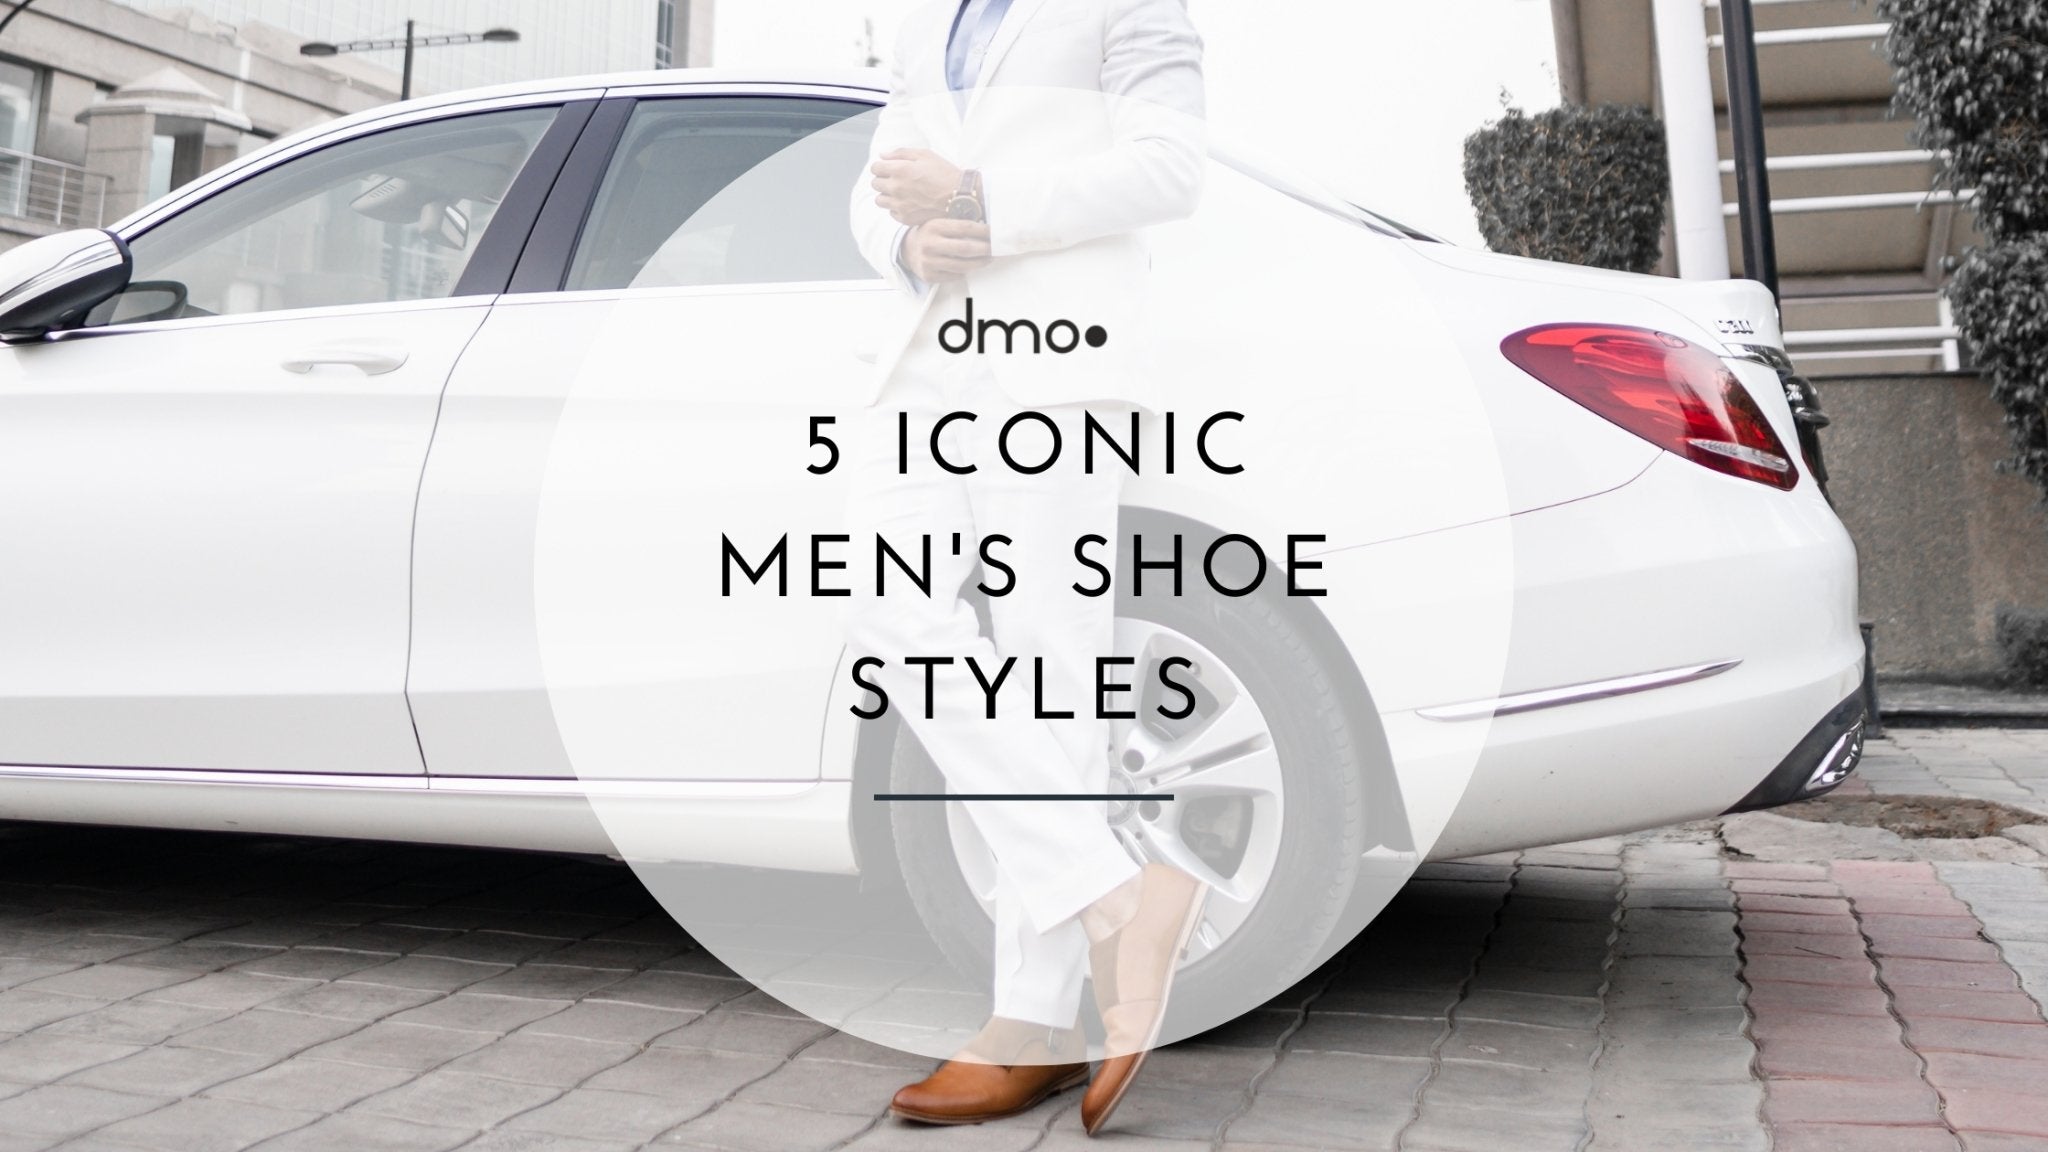 5 iconic shoe styles for men - dmodot Shoes